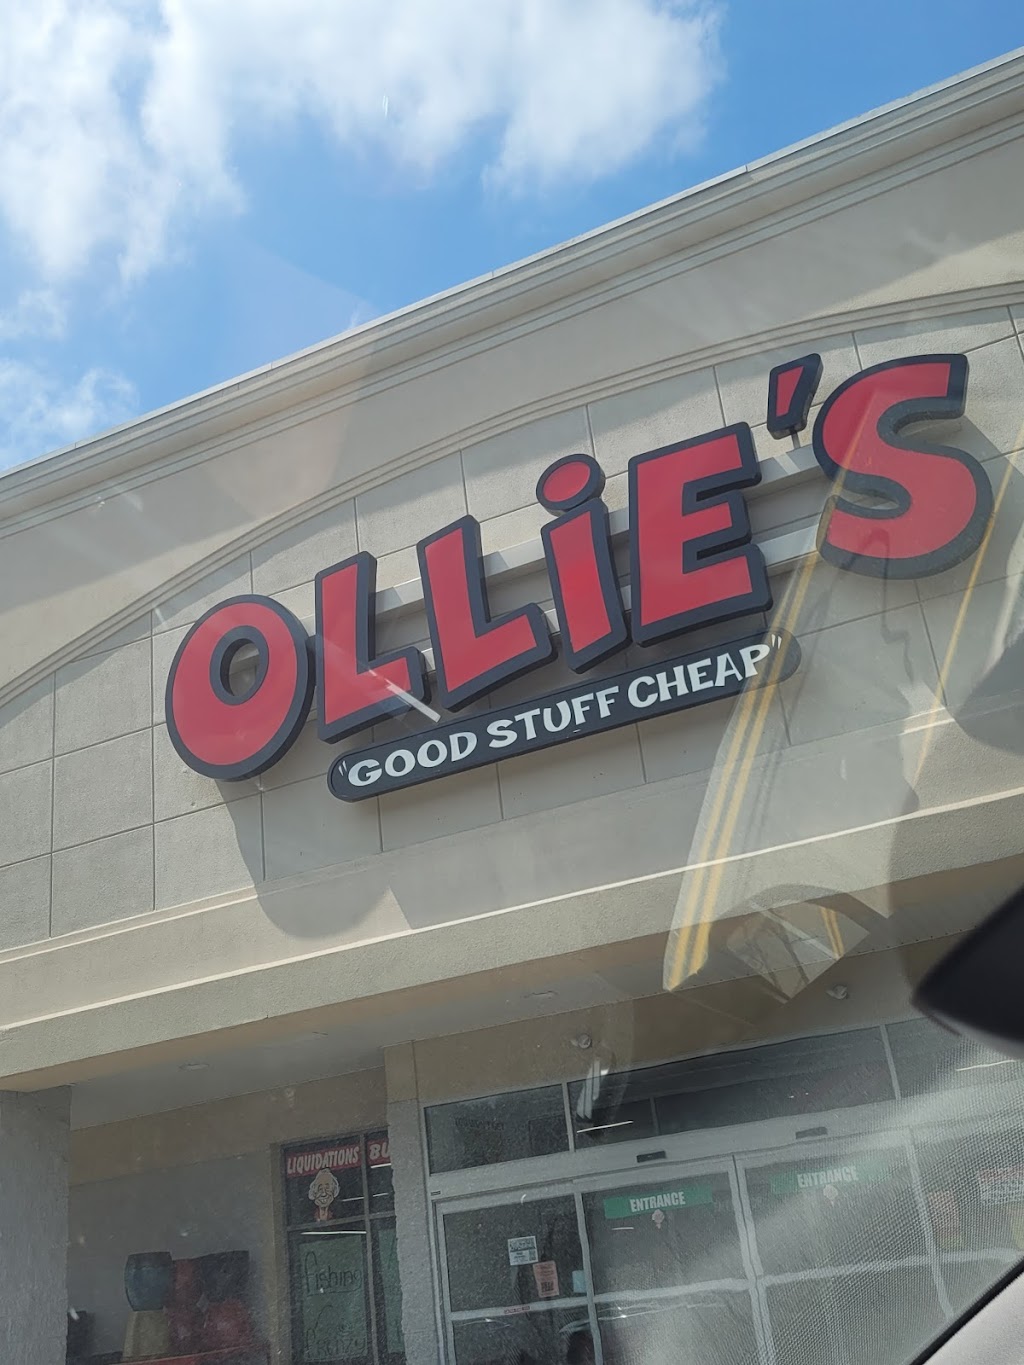 Ollies Bargain Outlet | 380 New Hartford Rd, Barkhamsted, CT 06063 | Phone: (860) 909-0532